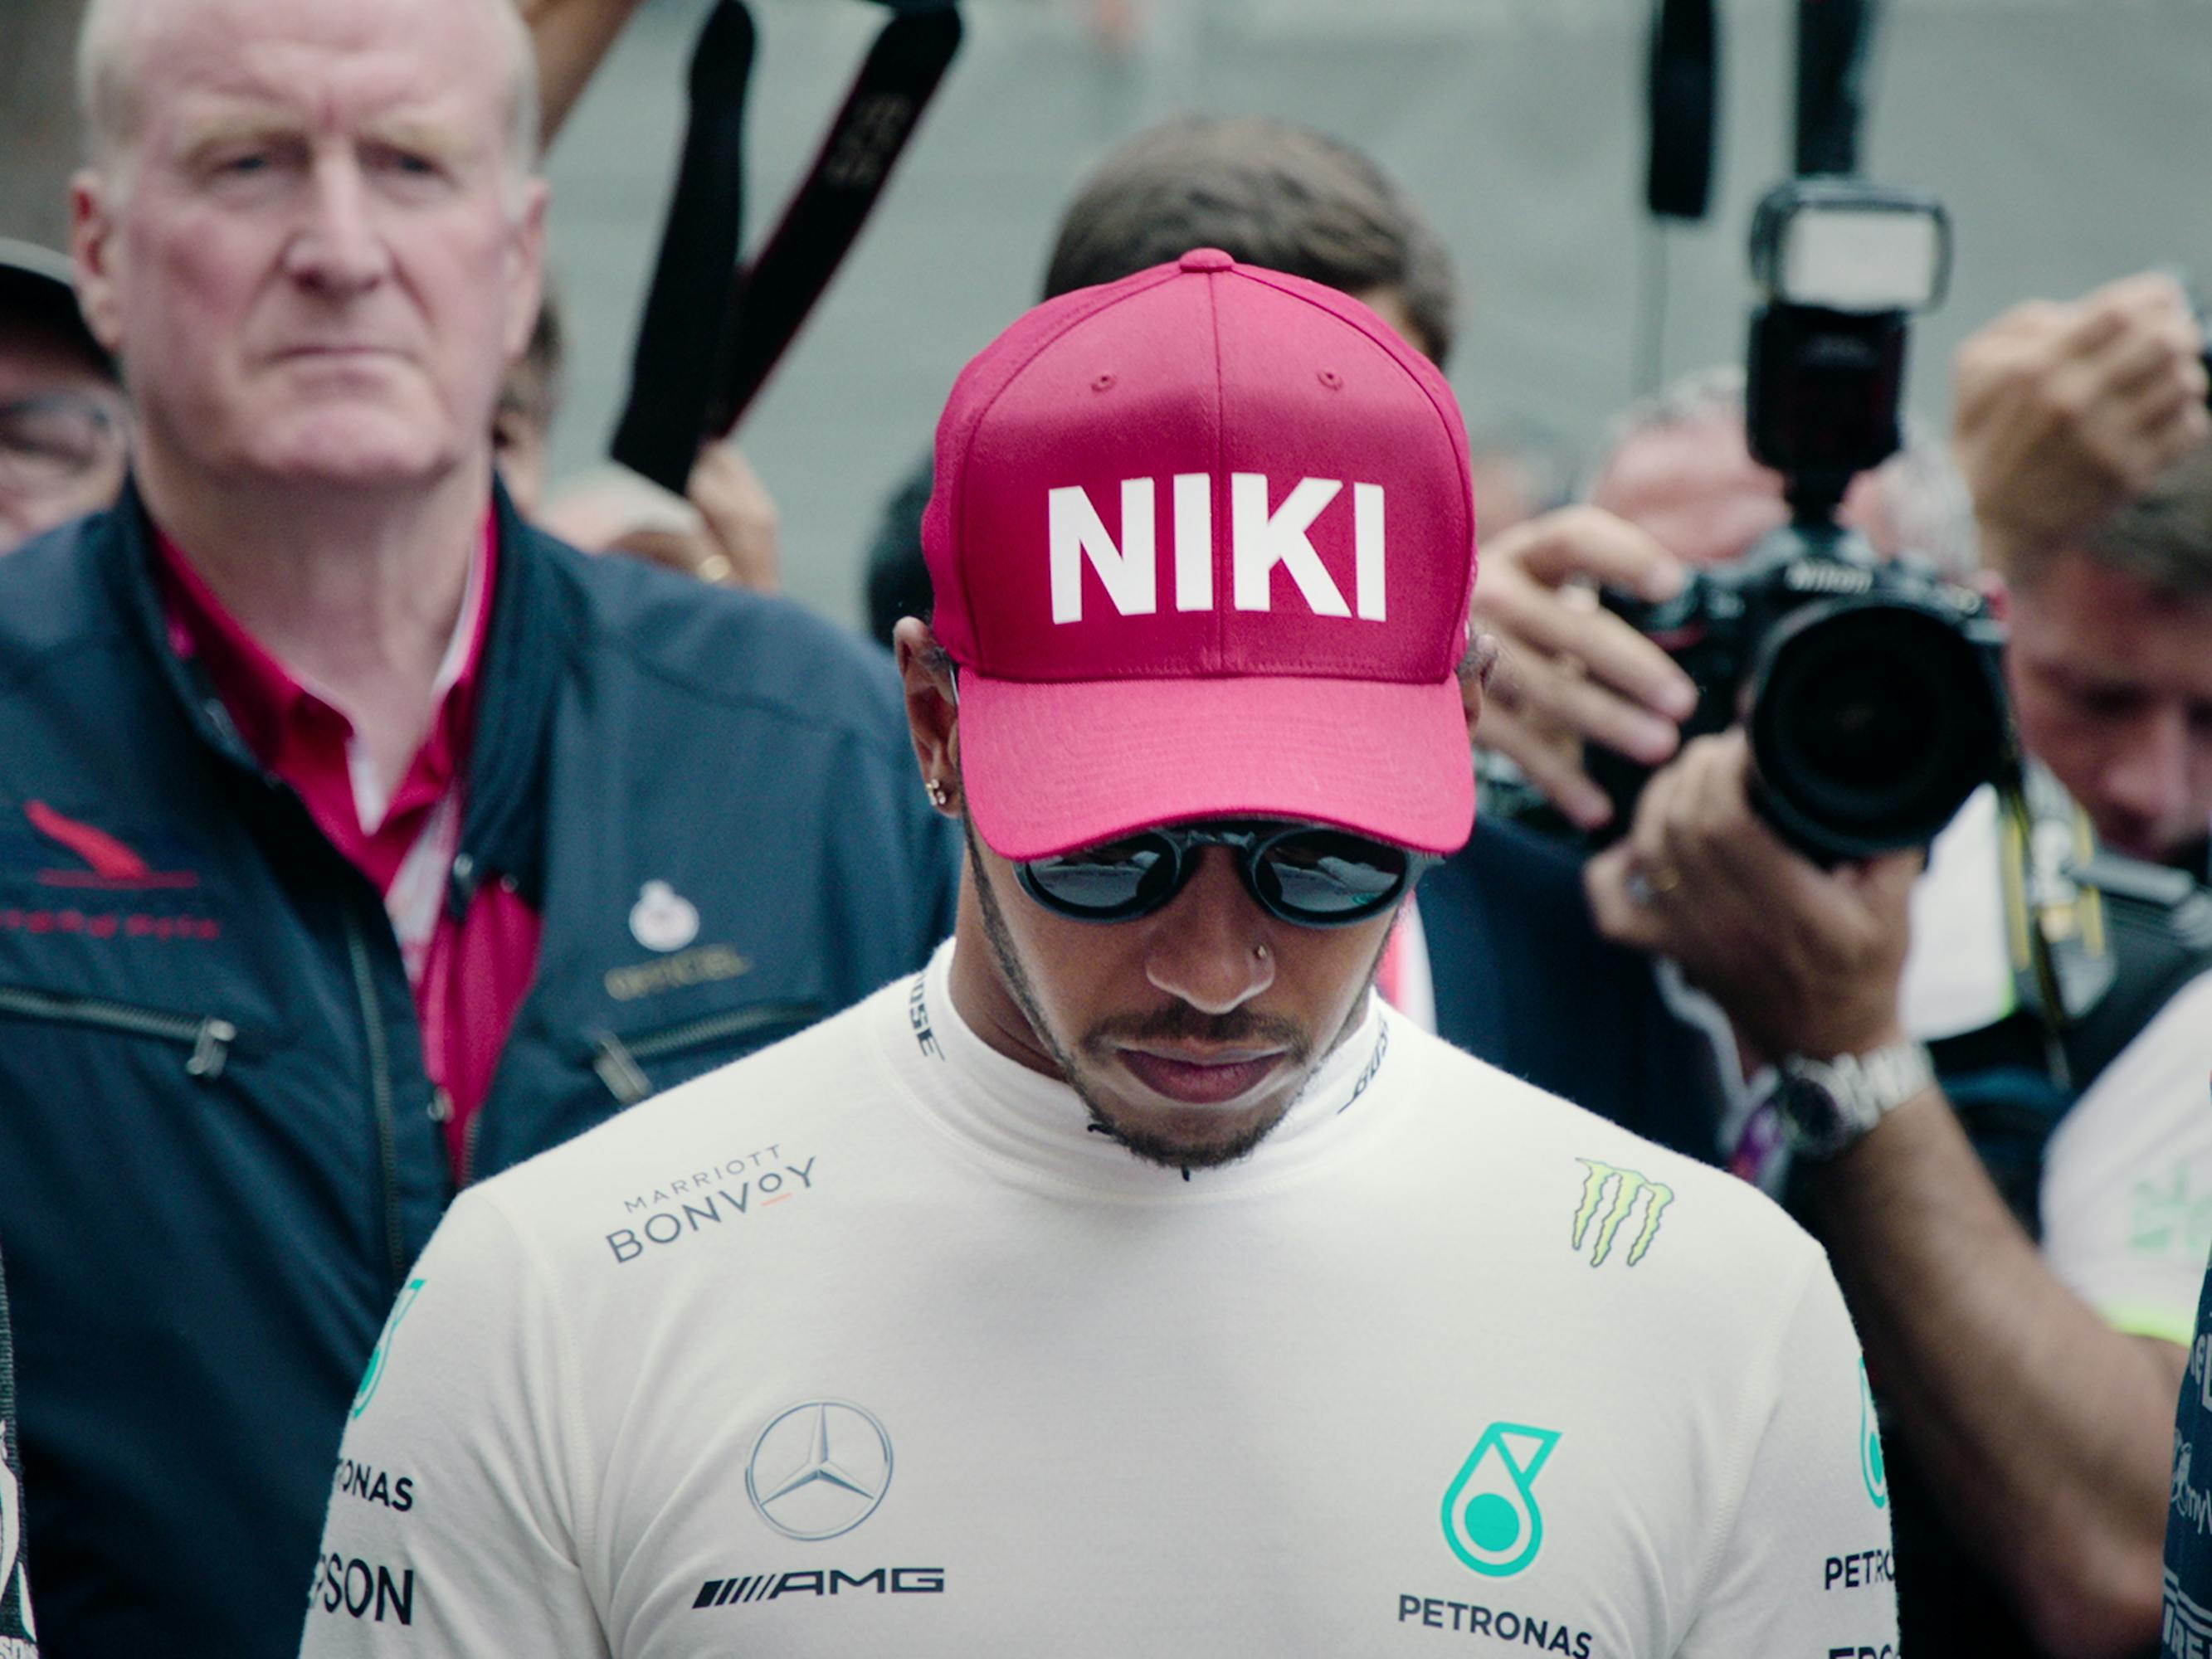 Lewis Hamilton wears sunglasses and looks to the ground. He stands in front of a group of people, some holding cameras. He wears a red hat that says “NIKI” after the death of Niki Lauda. 